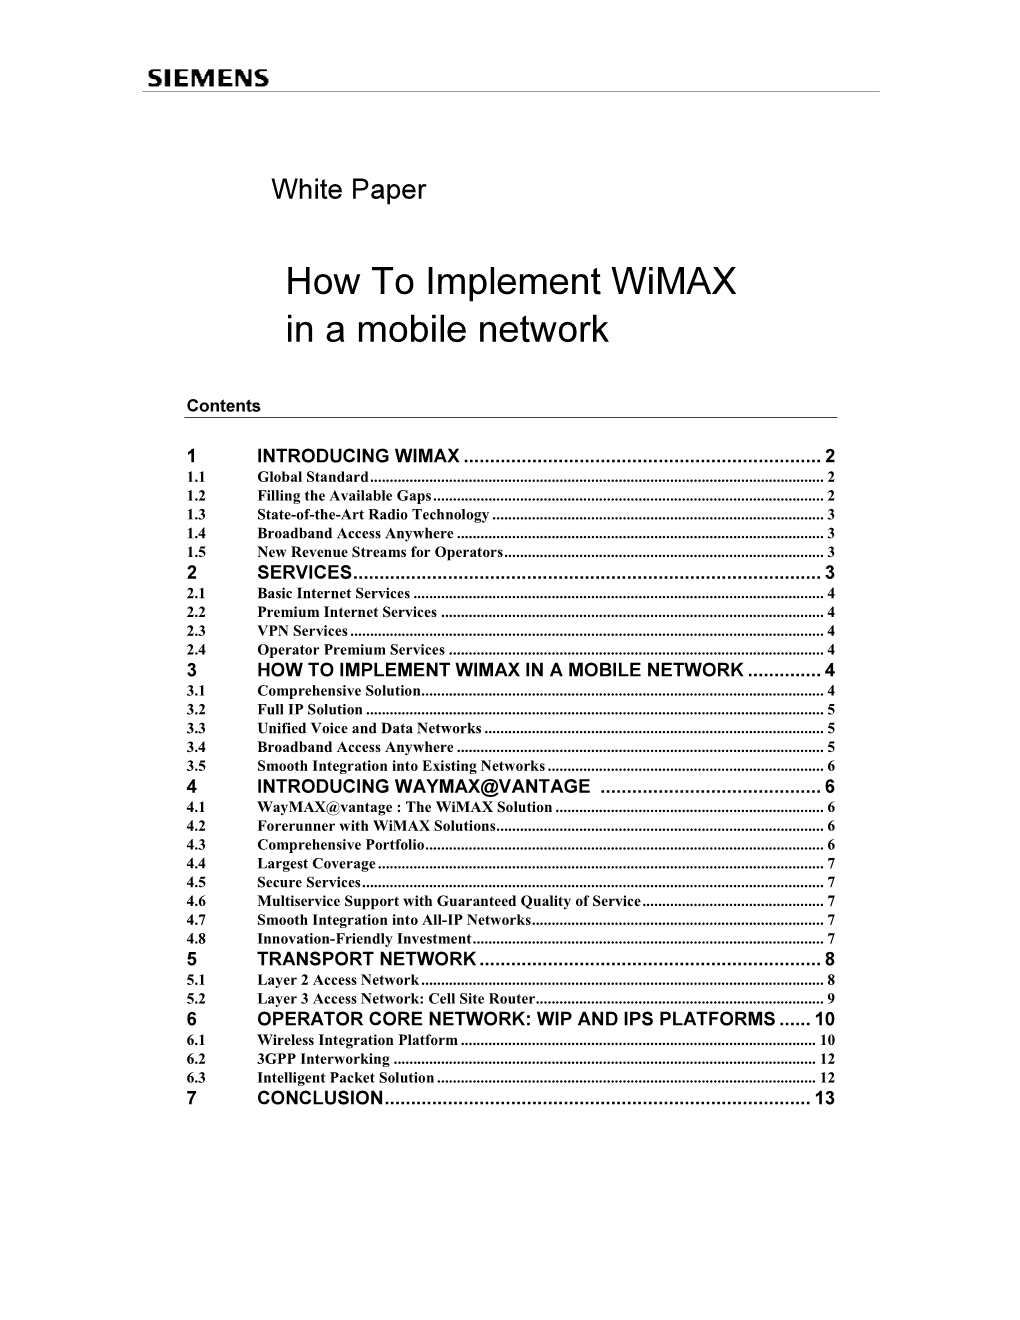 How to Implement Wimax in a Mobile Network